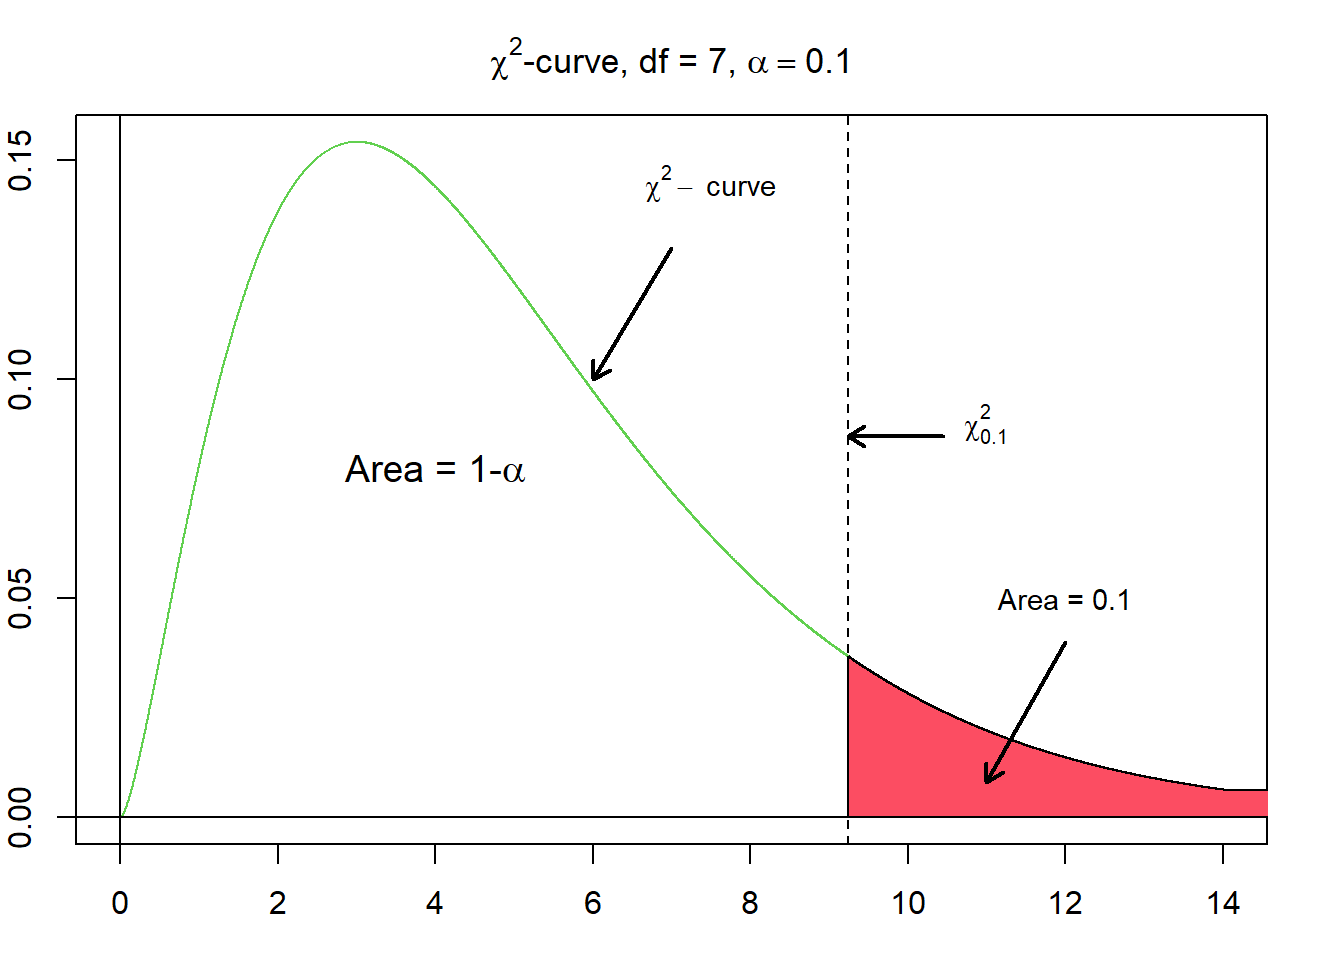 Figure of the chi-squared probability density functions for a degree of freedom of 7. Additionally, the rejection and non-rejection areas are coloured based on a significance level of 90 % or an error level of 10 %, respetively.